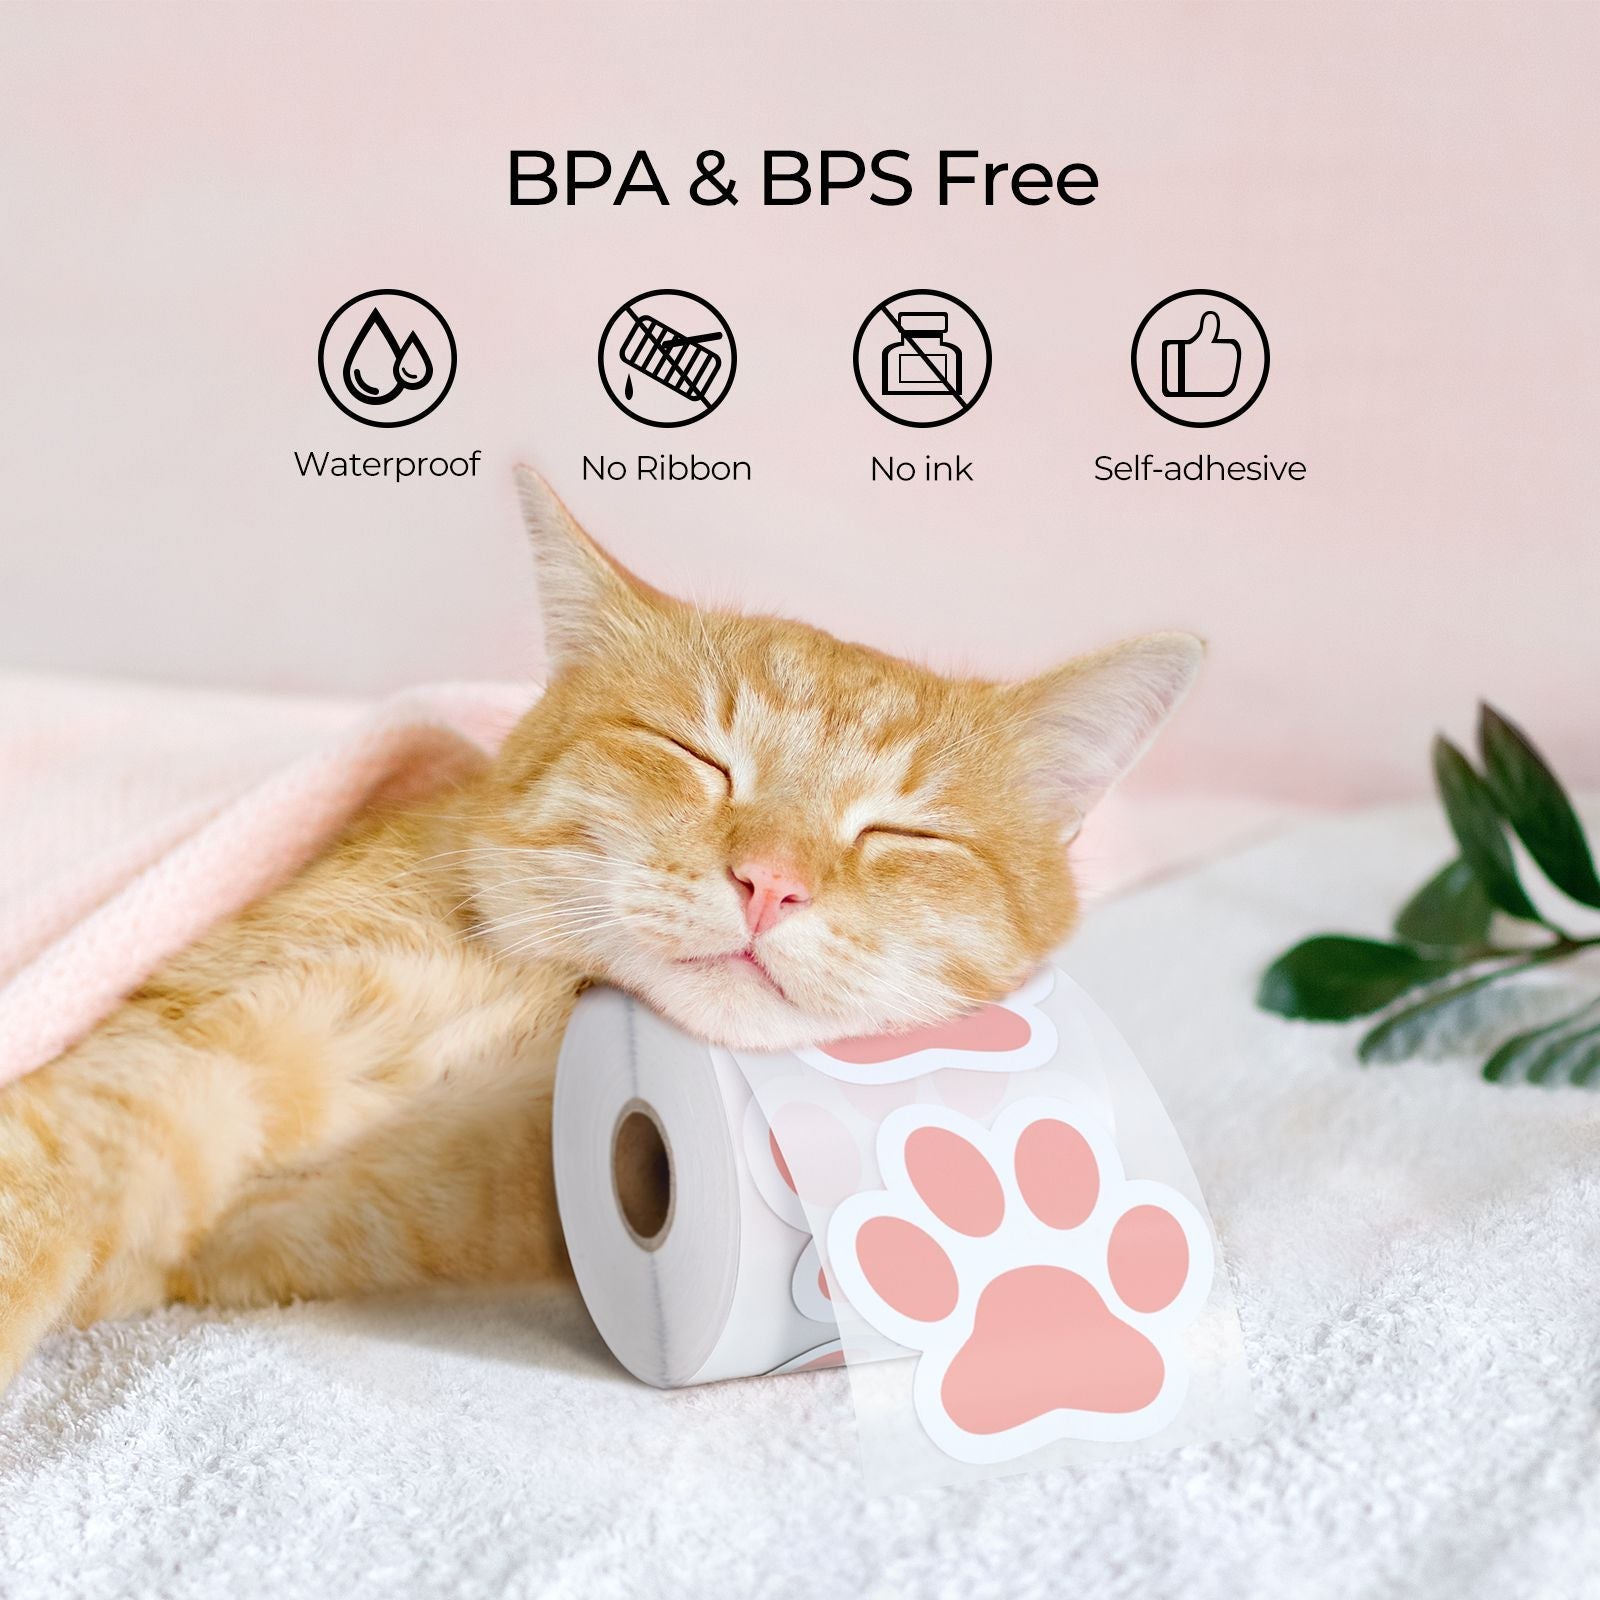 These paw-shaped thermal labels are an environmentally friendly choice as they require no ink or toner and BPA&BPS-Free.